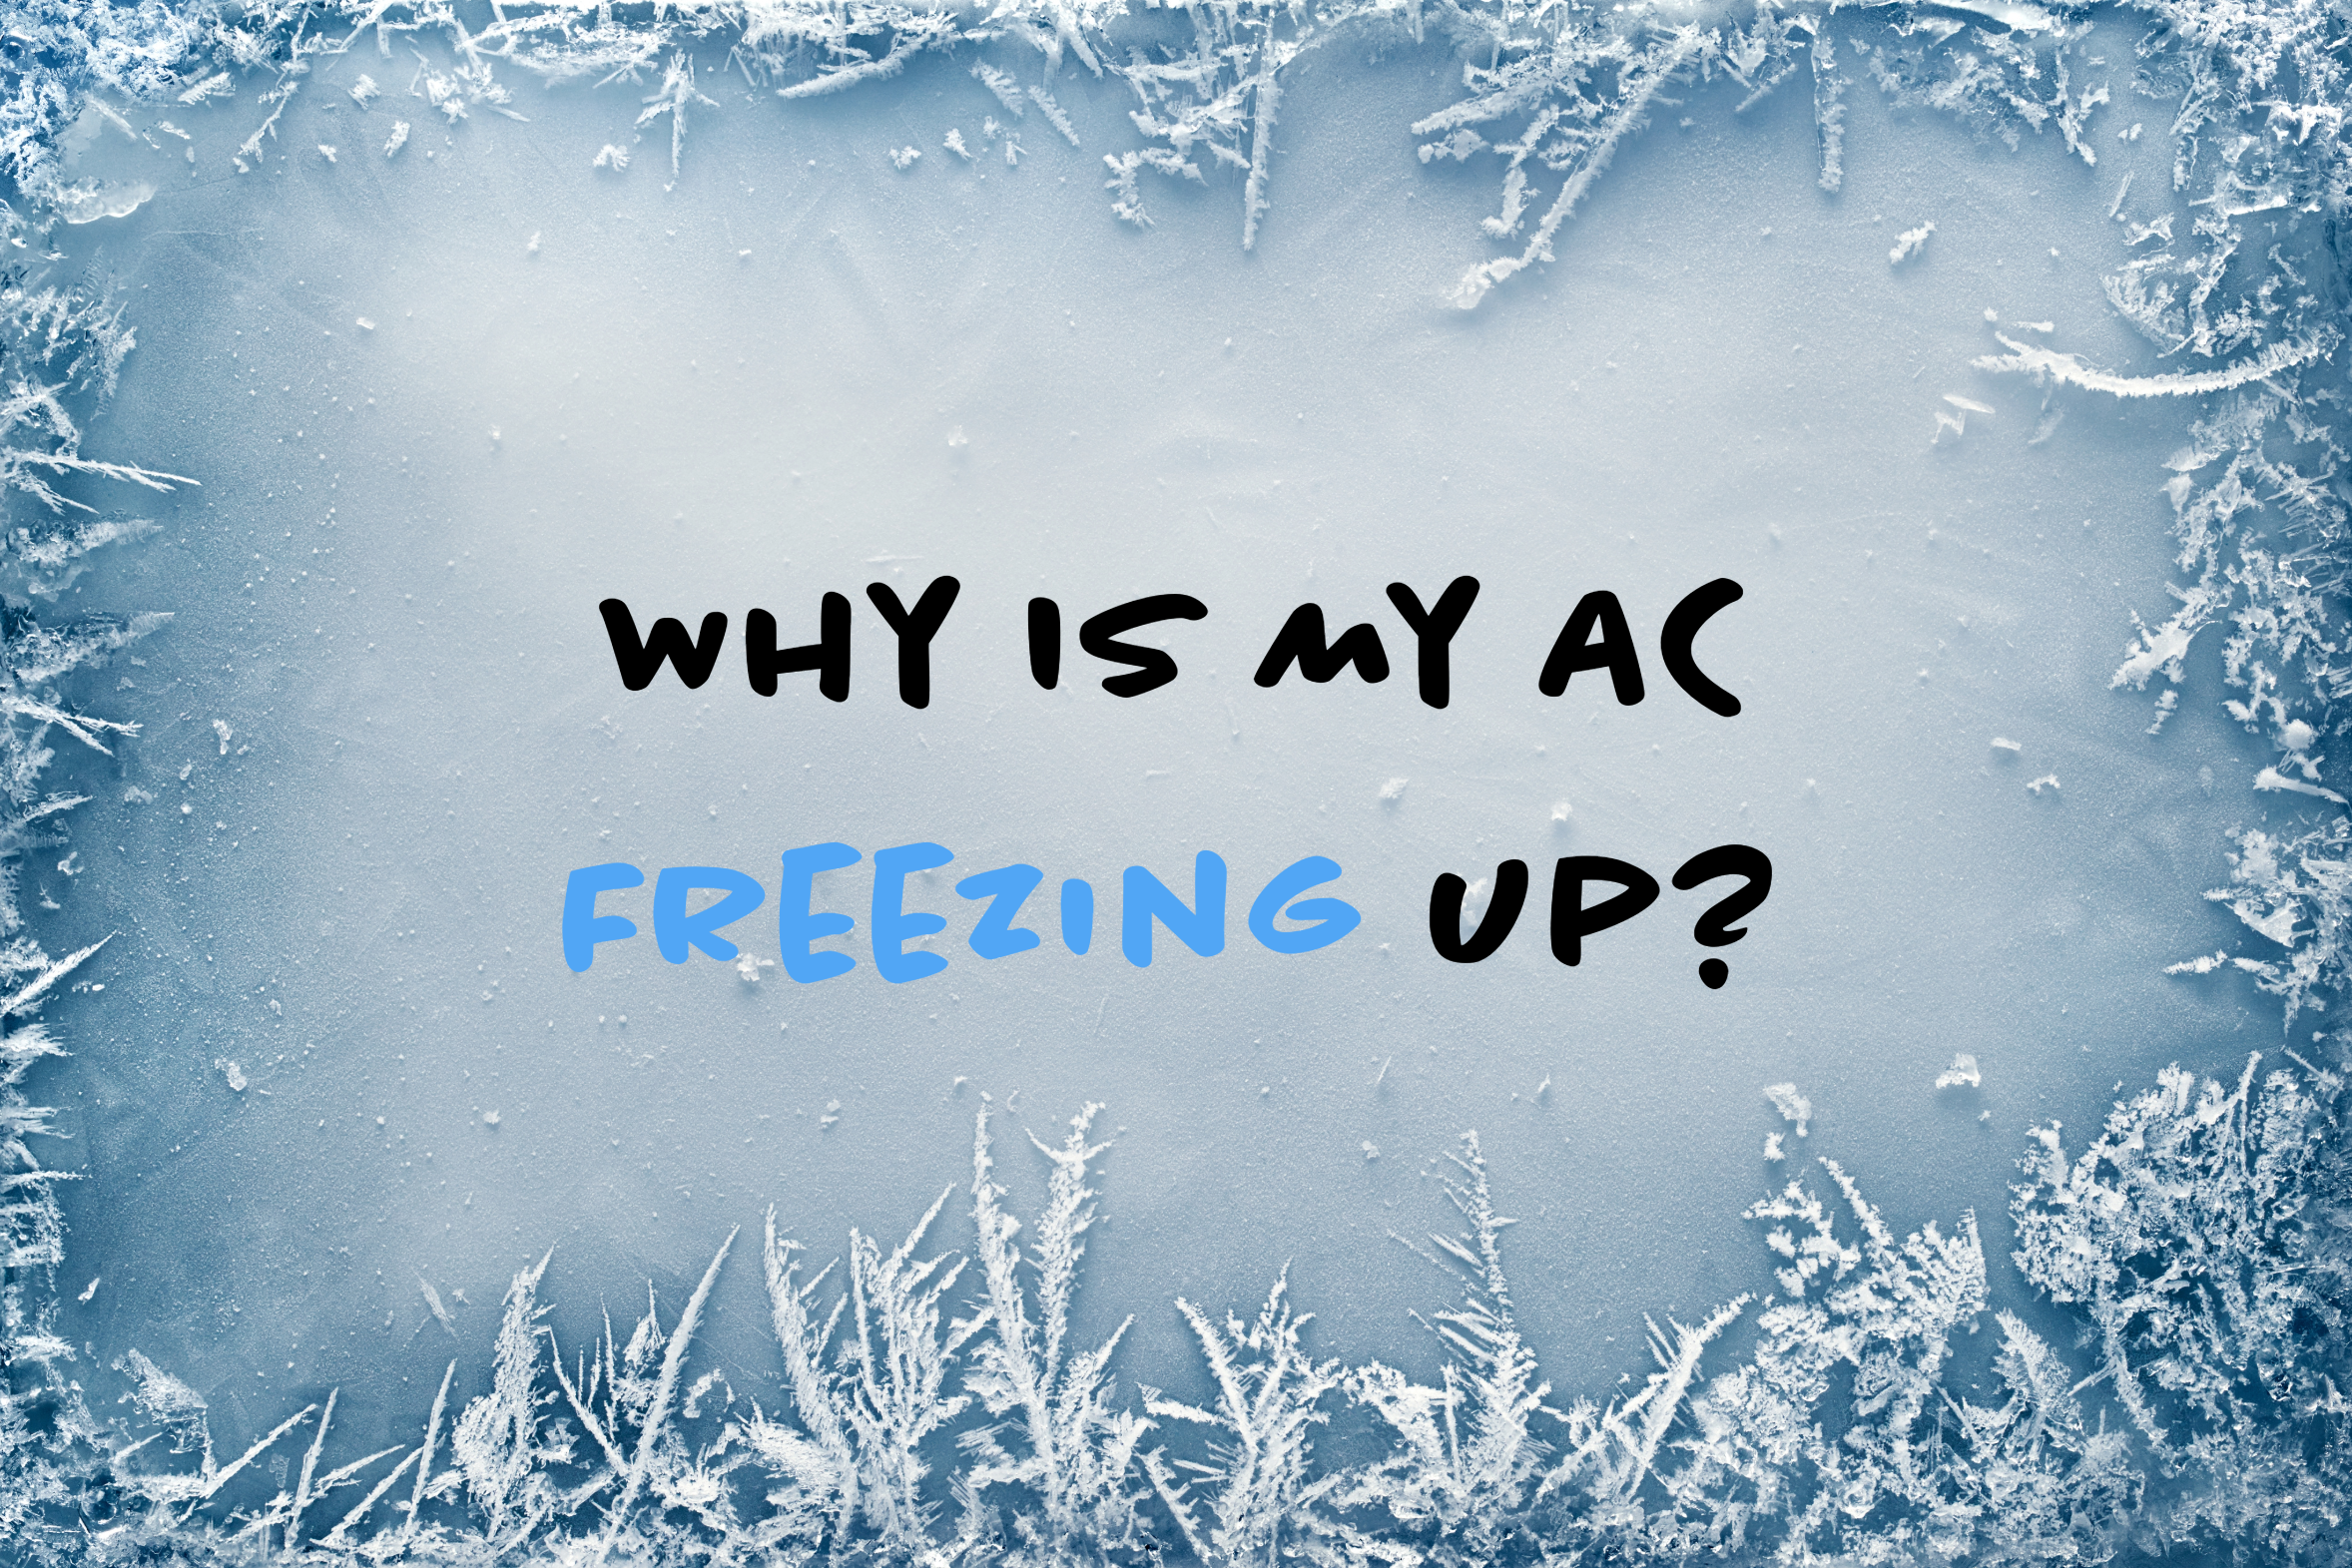 Blog to help troubleshoot why your AC is freezing up.